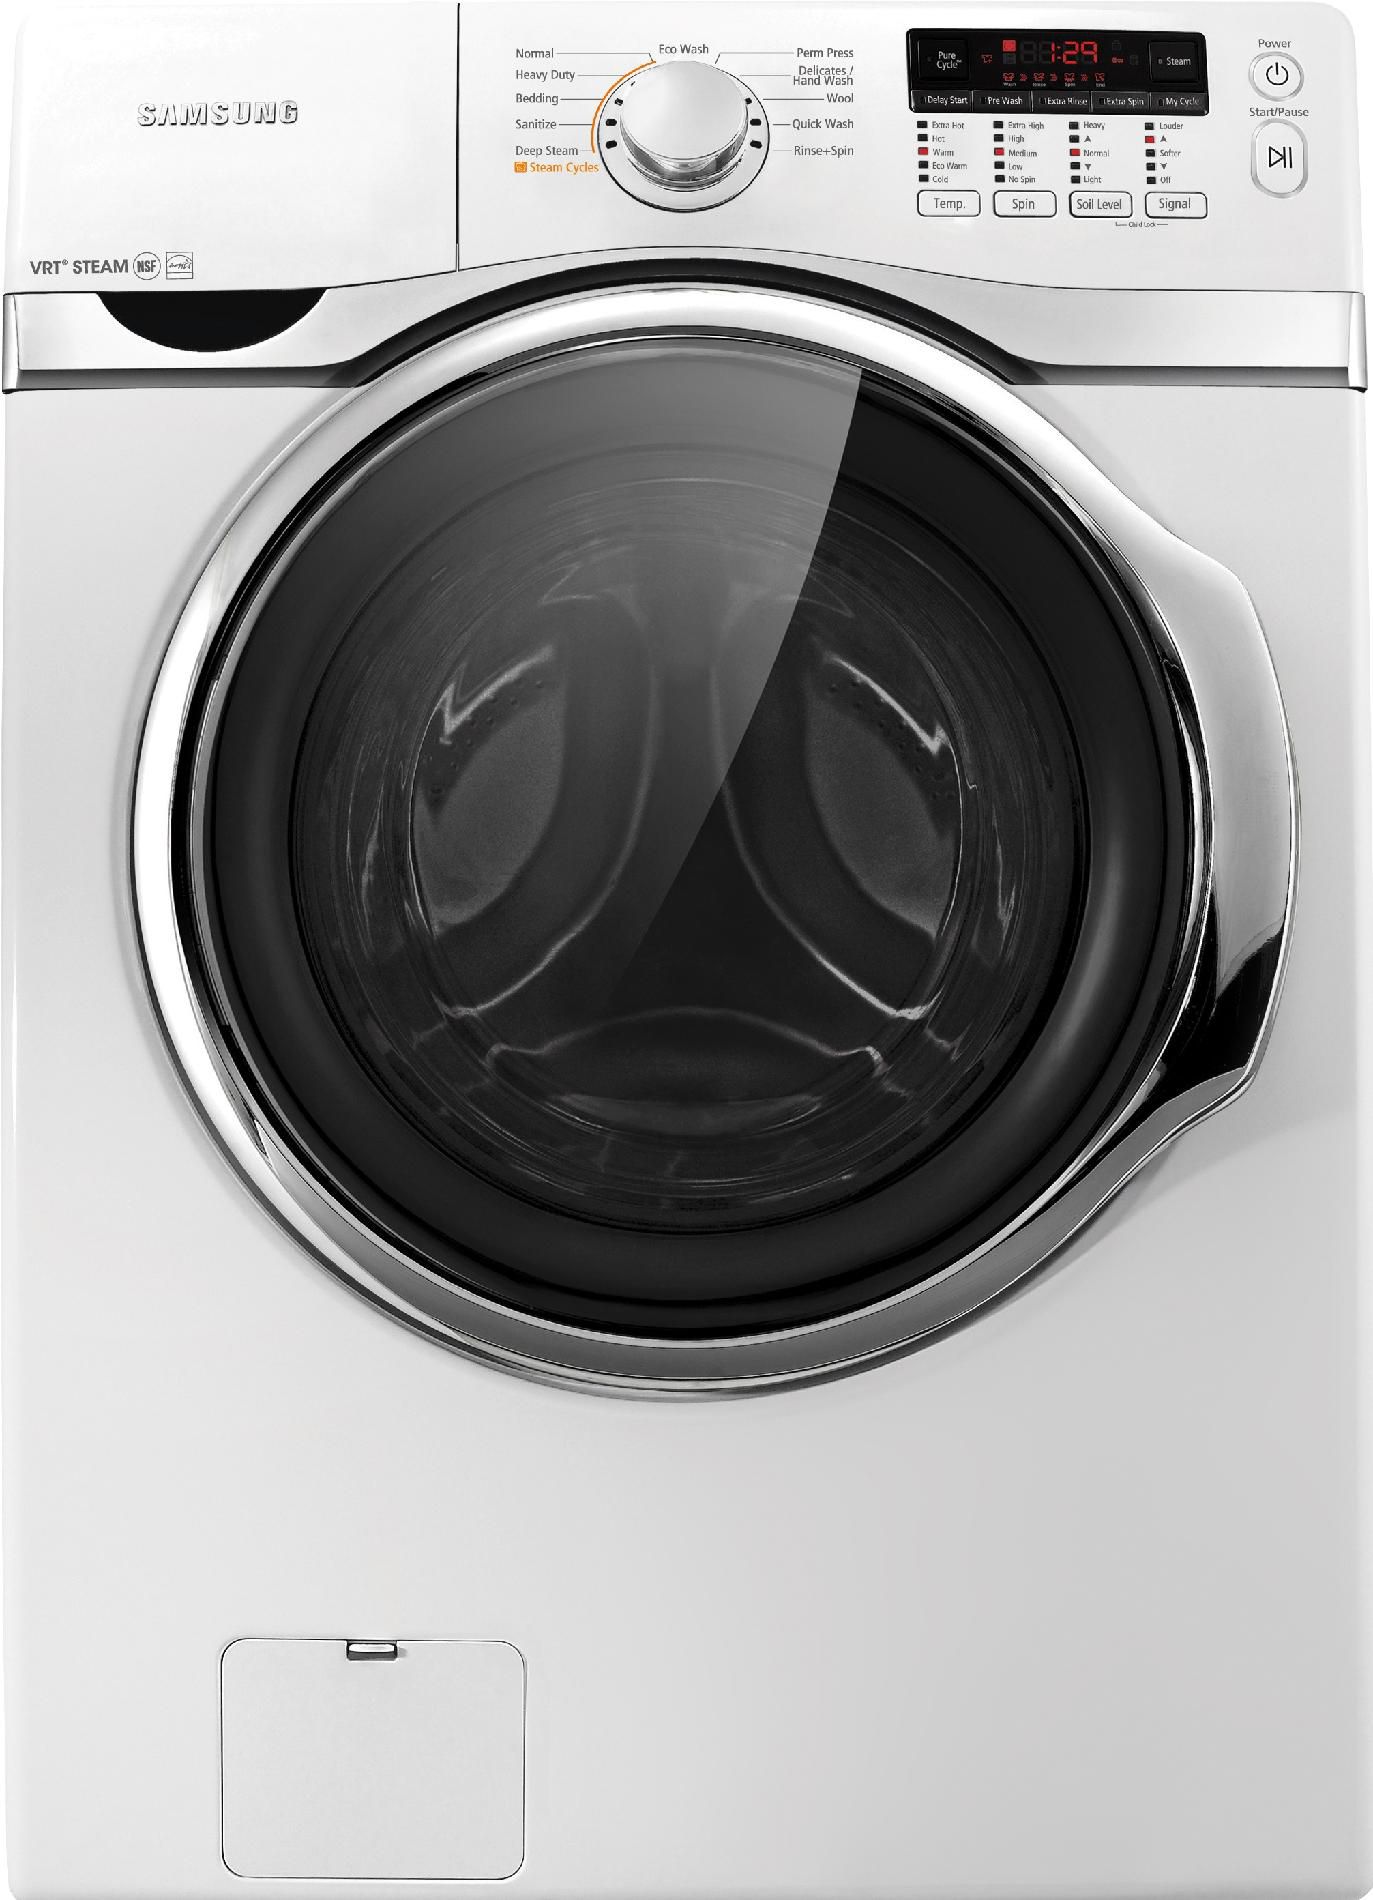 Samsung 3.9 cu. ft. Front-Load Washer - White